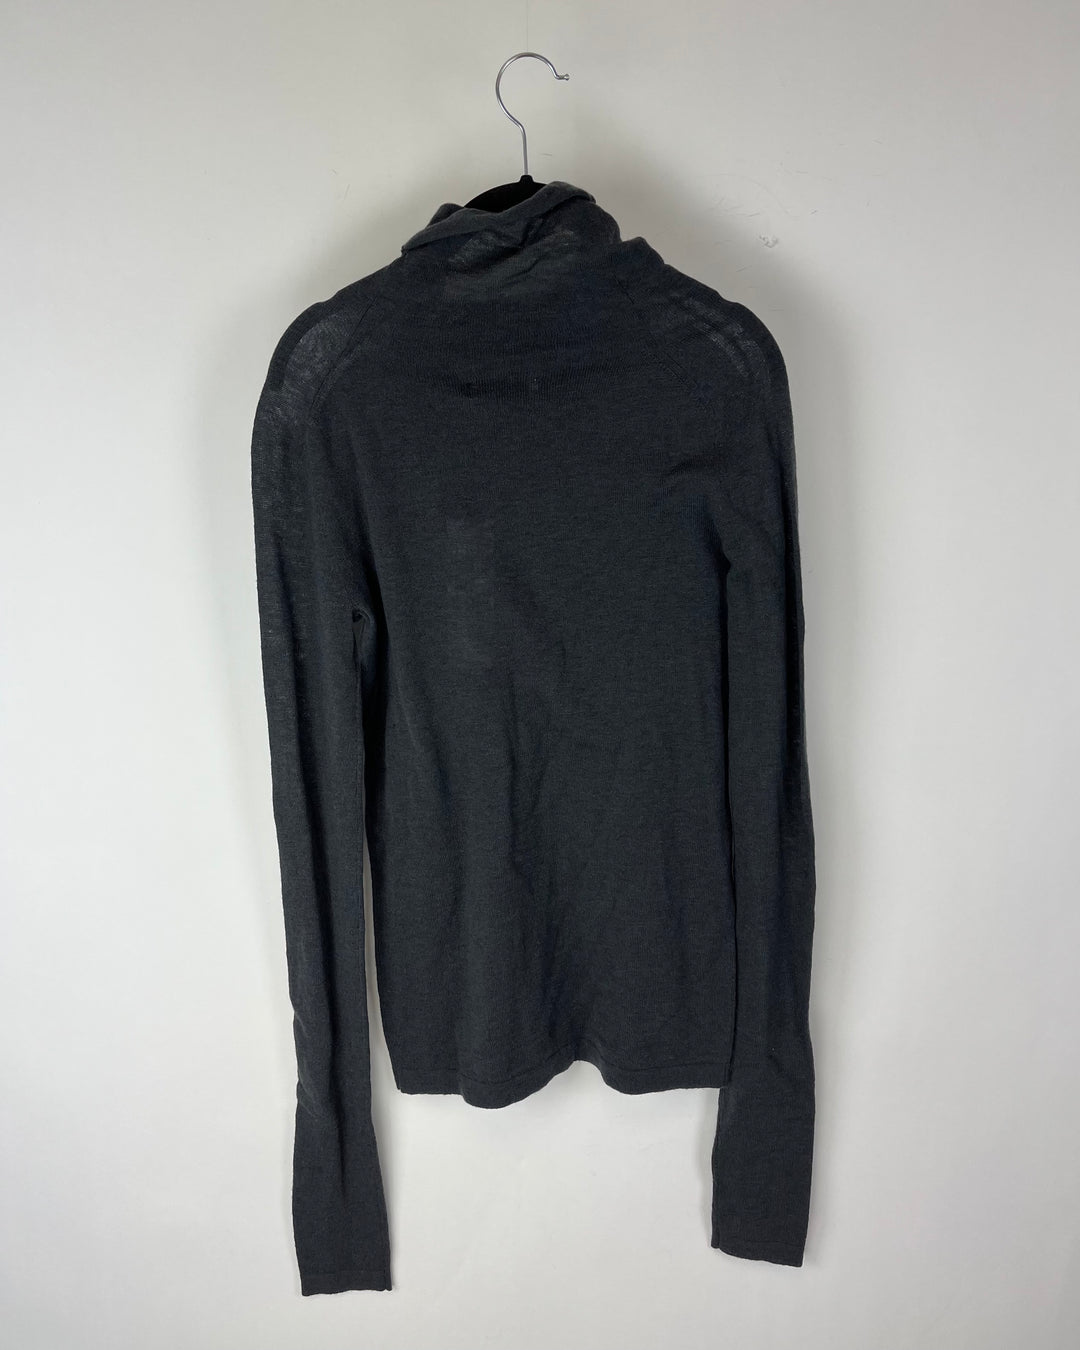 Gray Long Sleeve Turtle Neck Top - Small